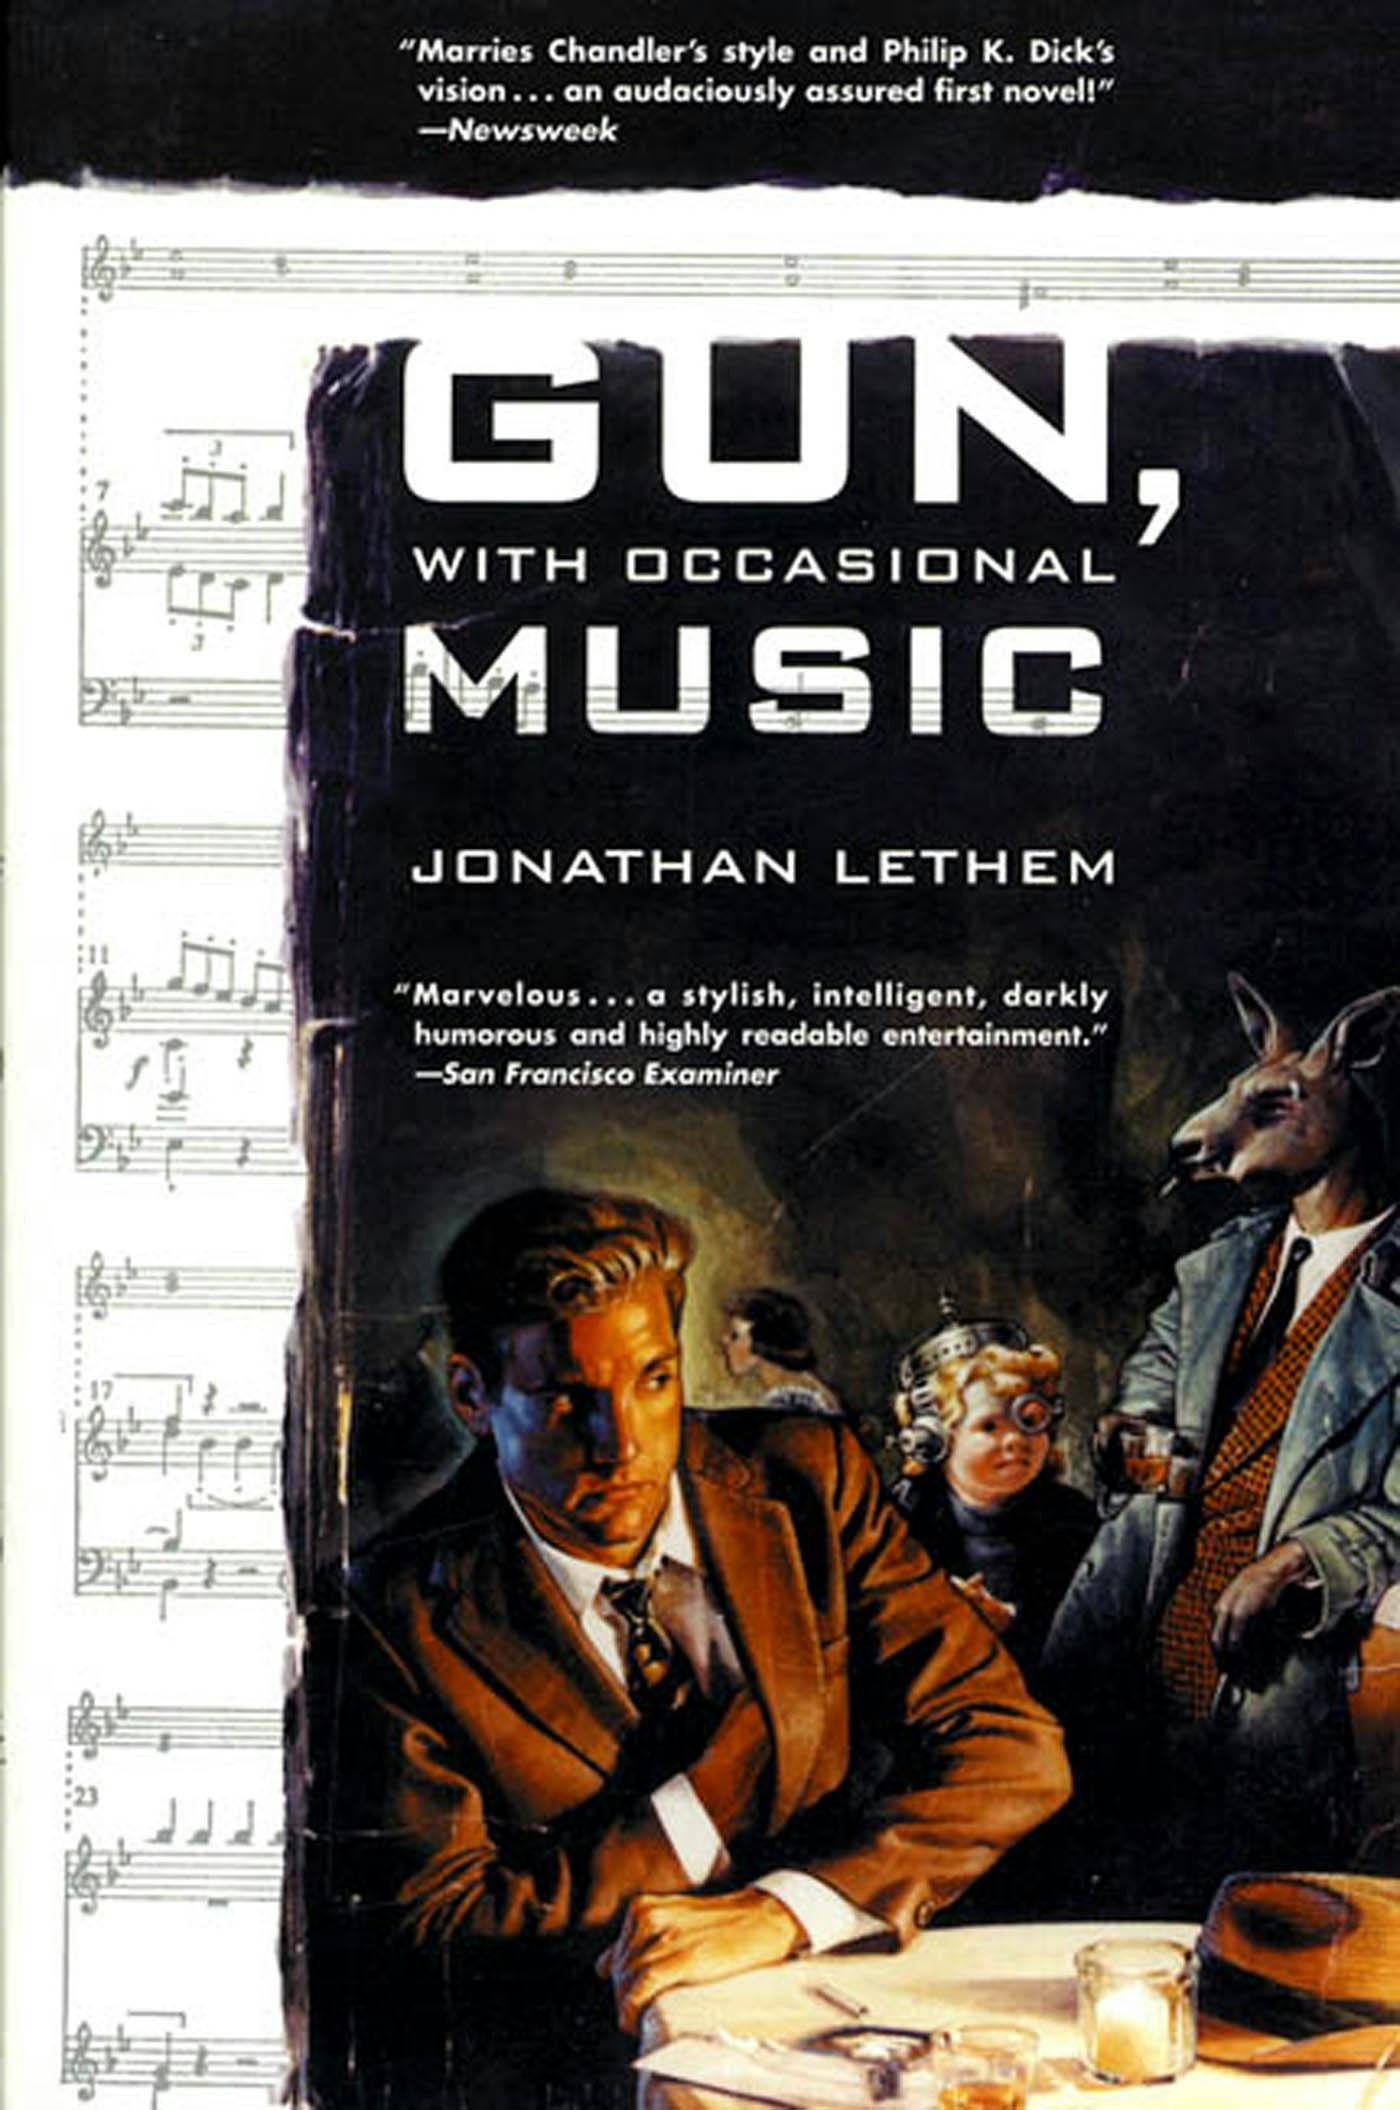 Cover for the book titled as: Gun, With Occasional Music